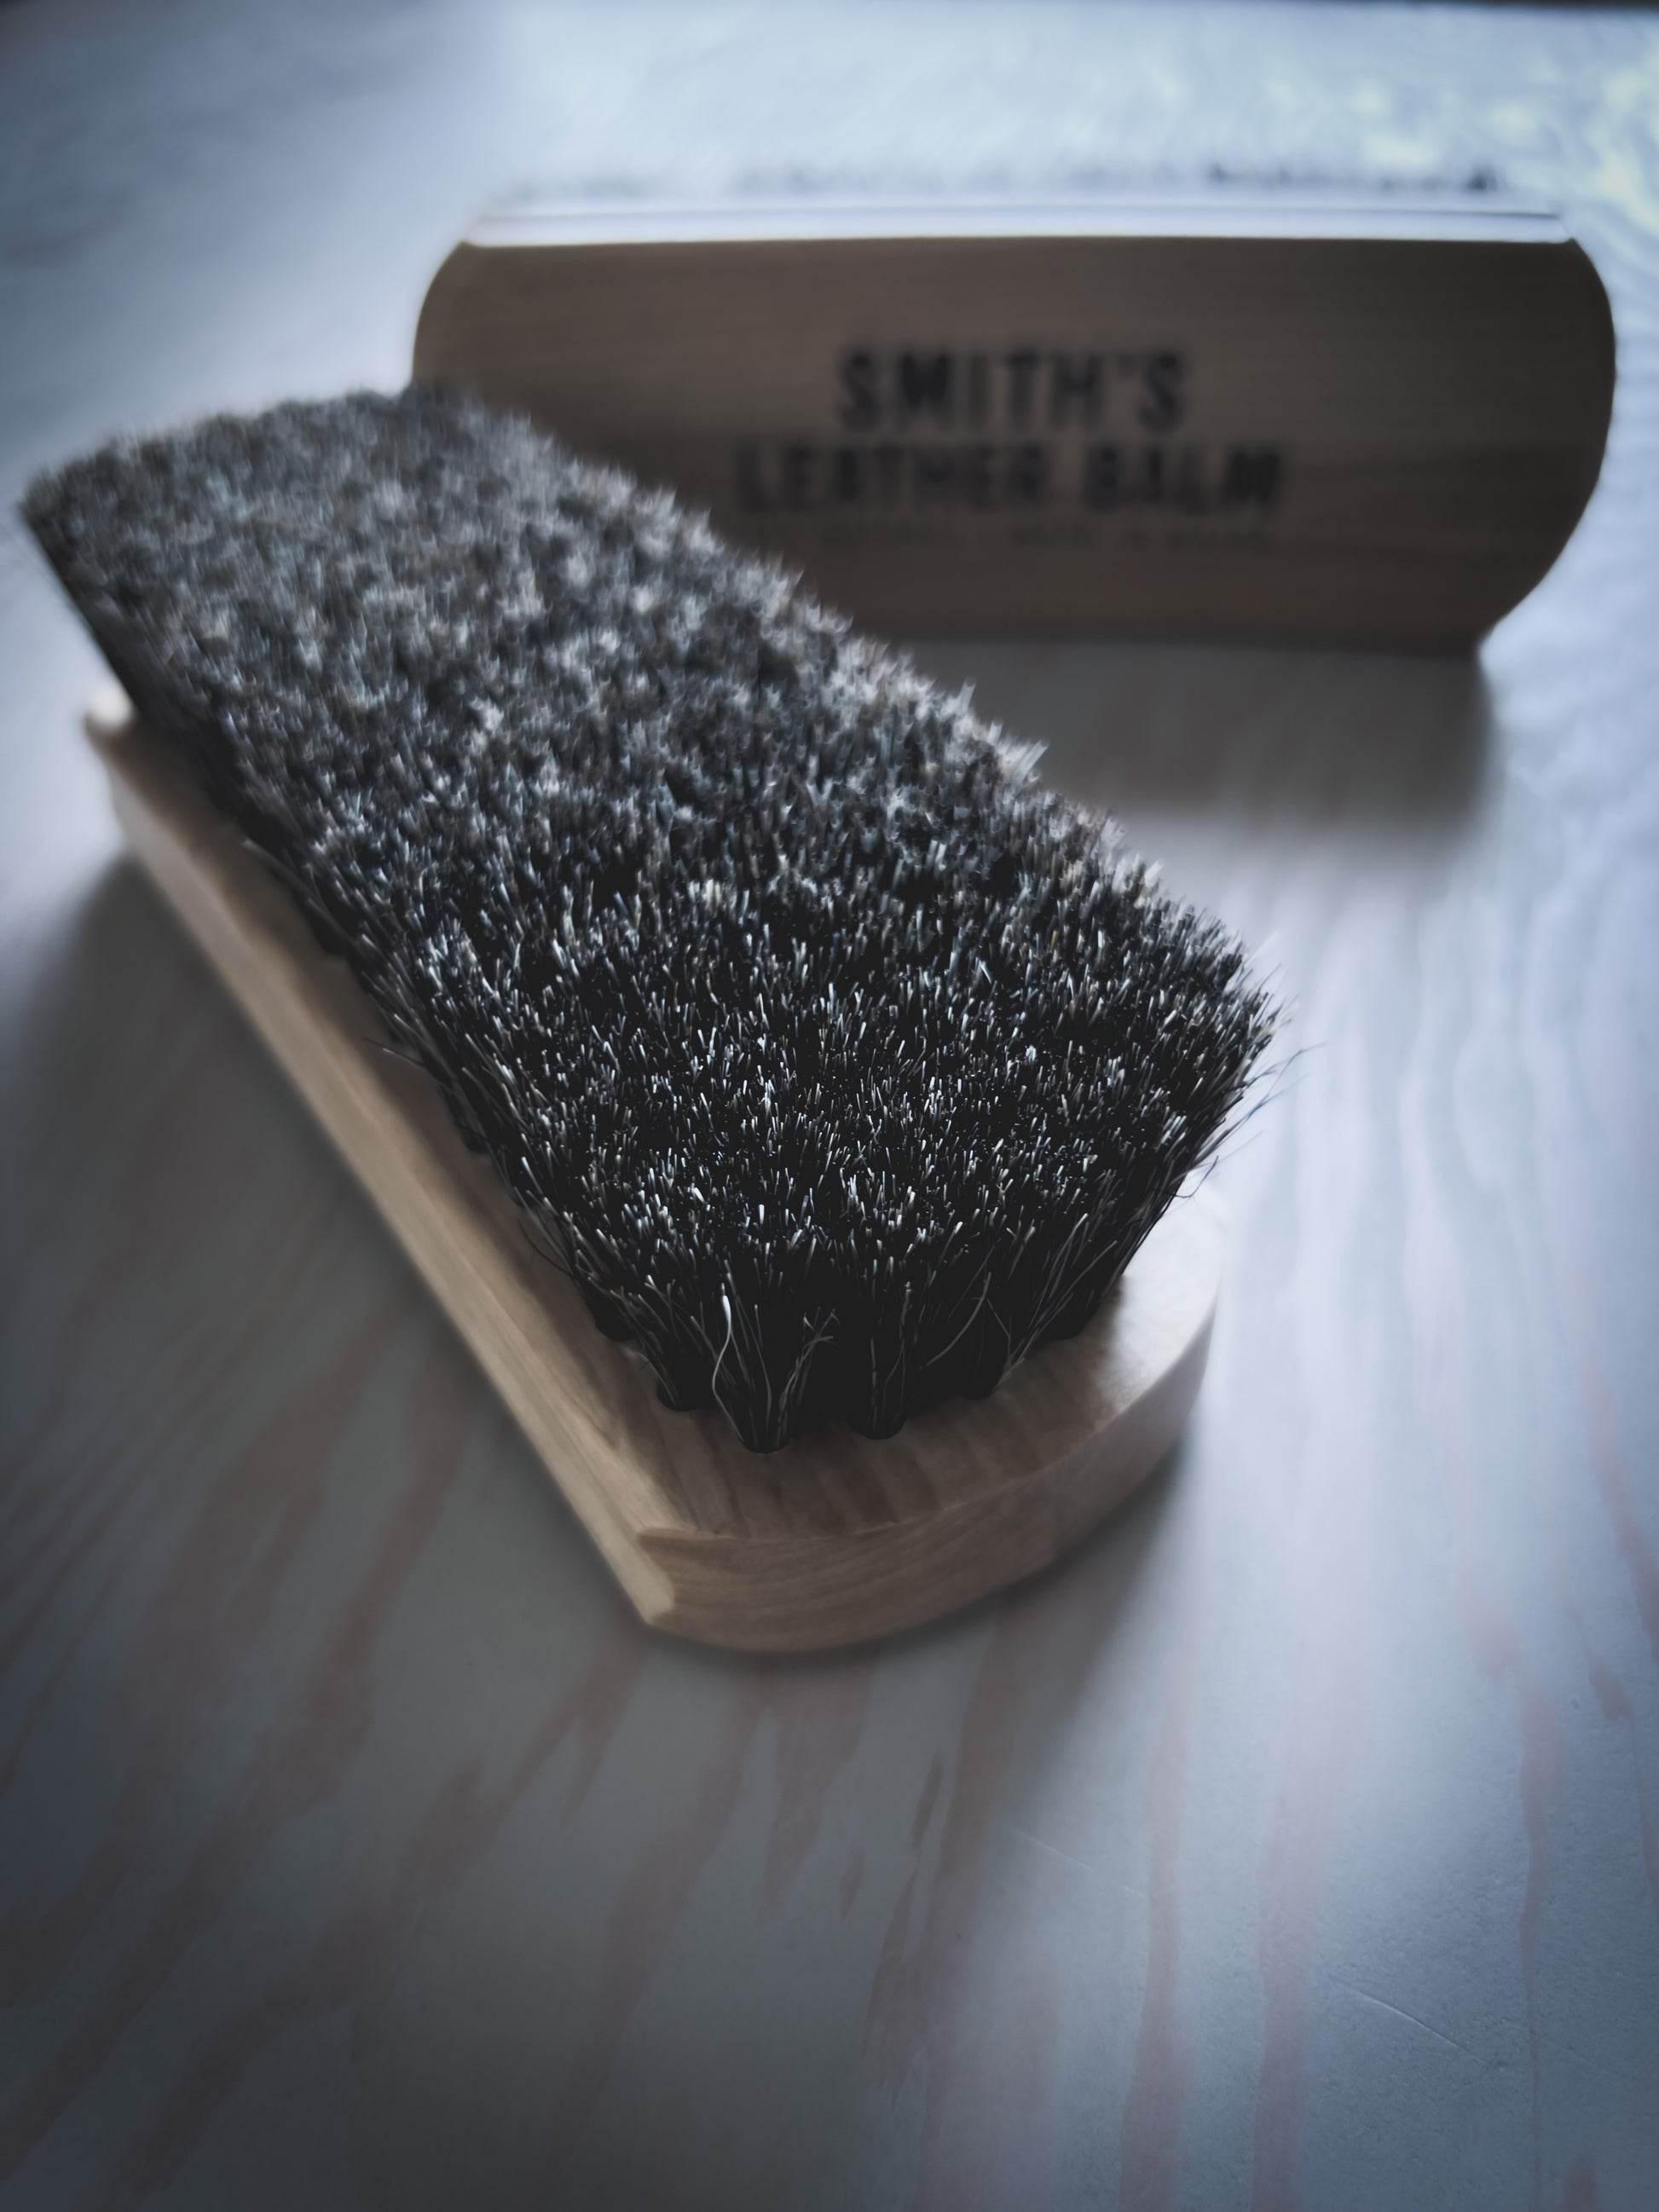 Smith's All Natural Hair Brush